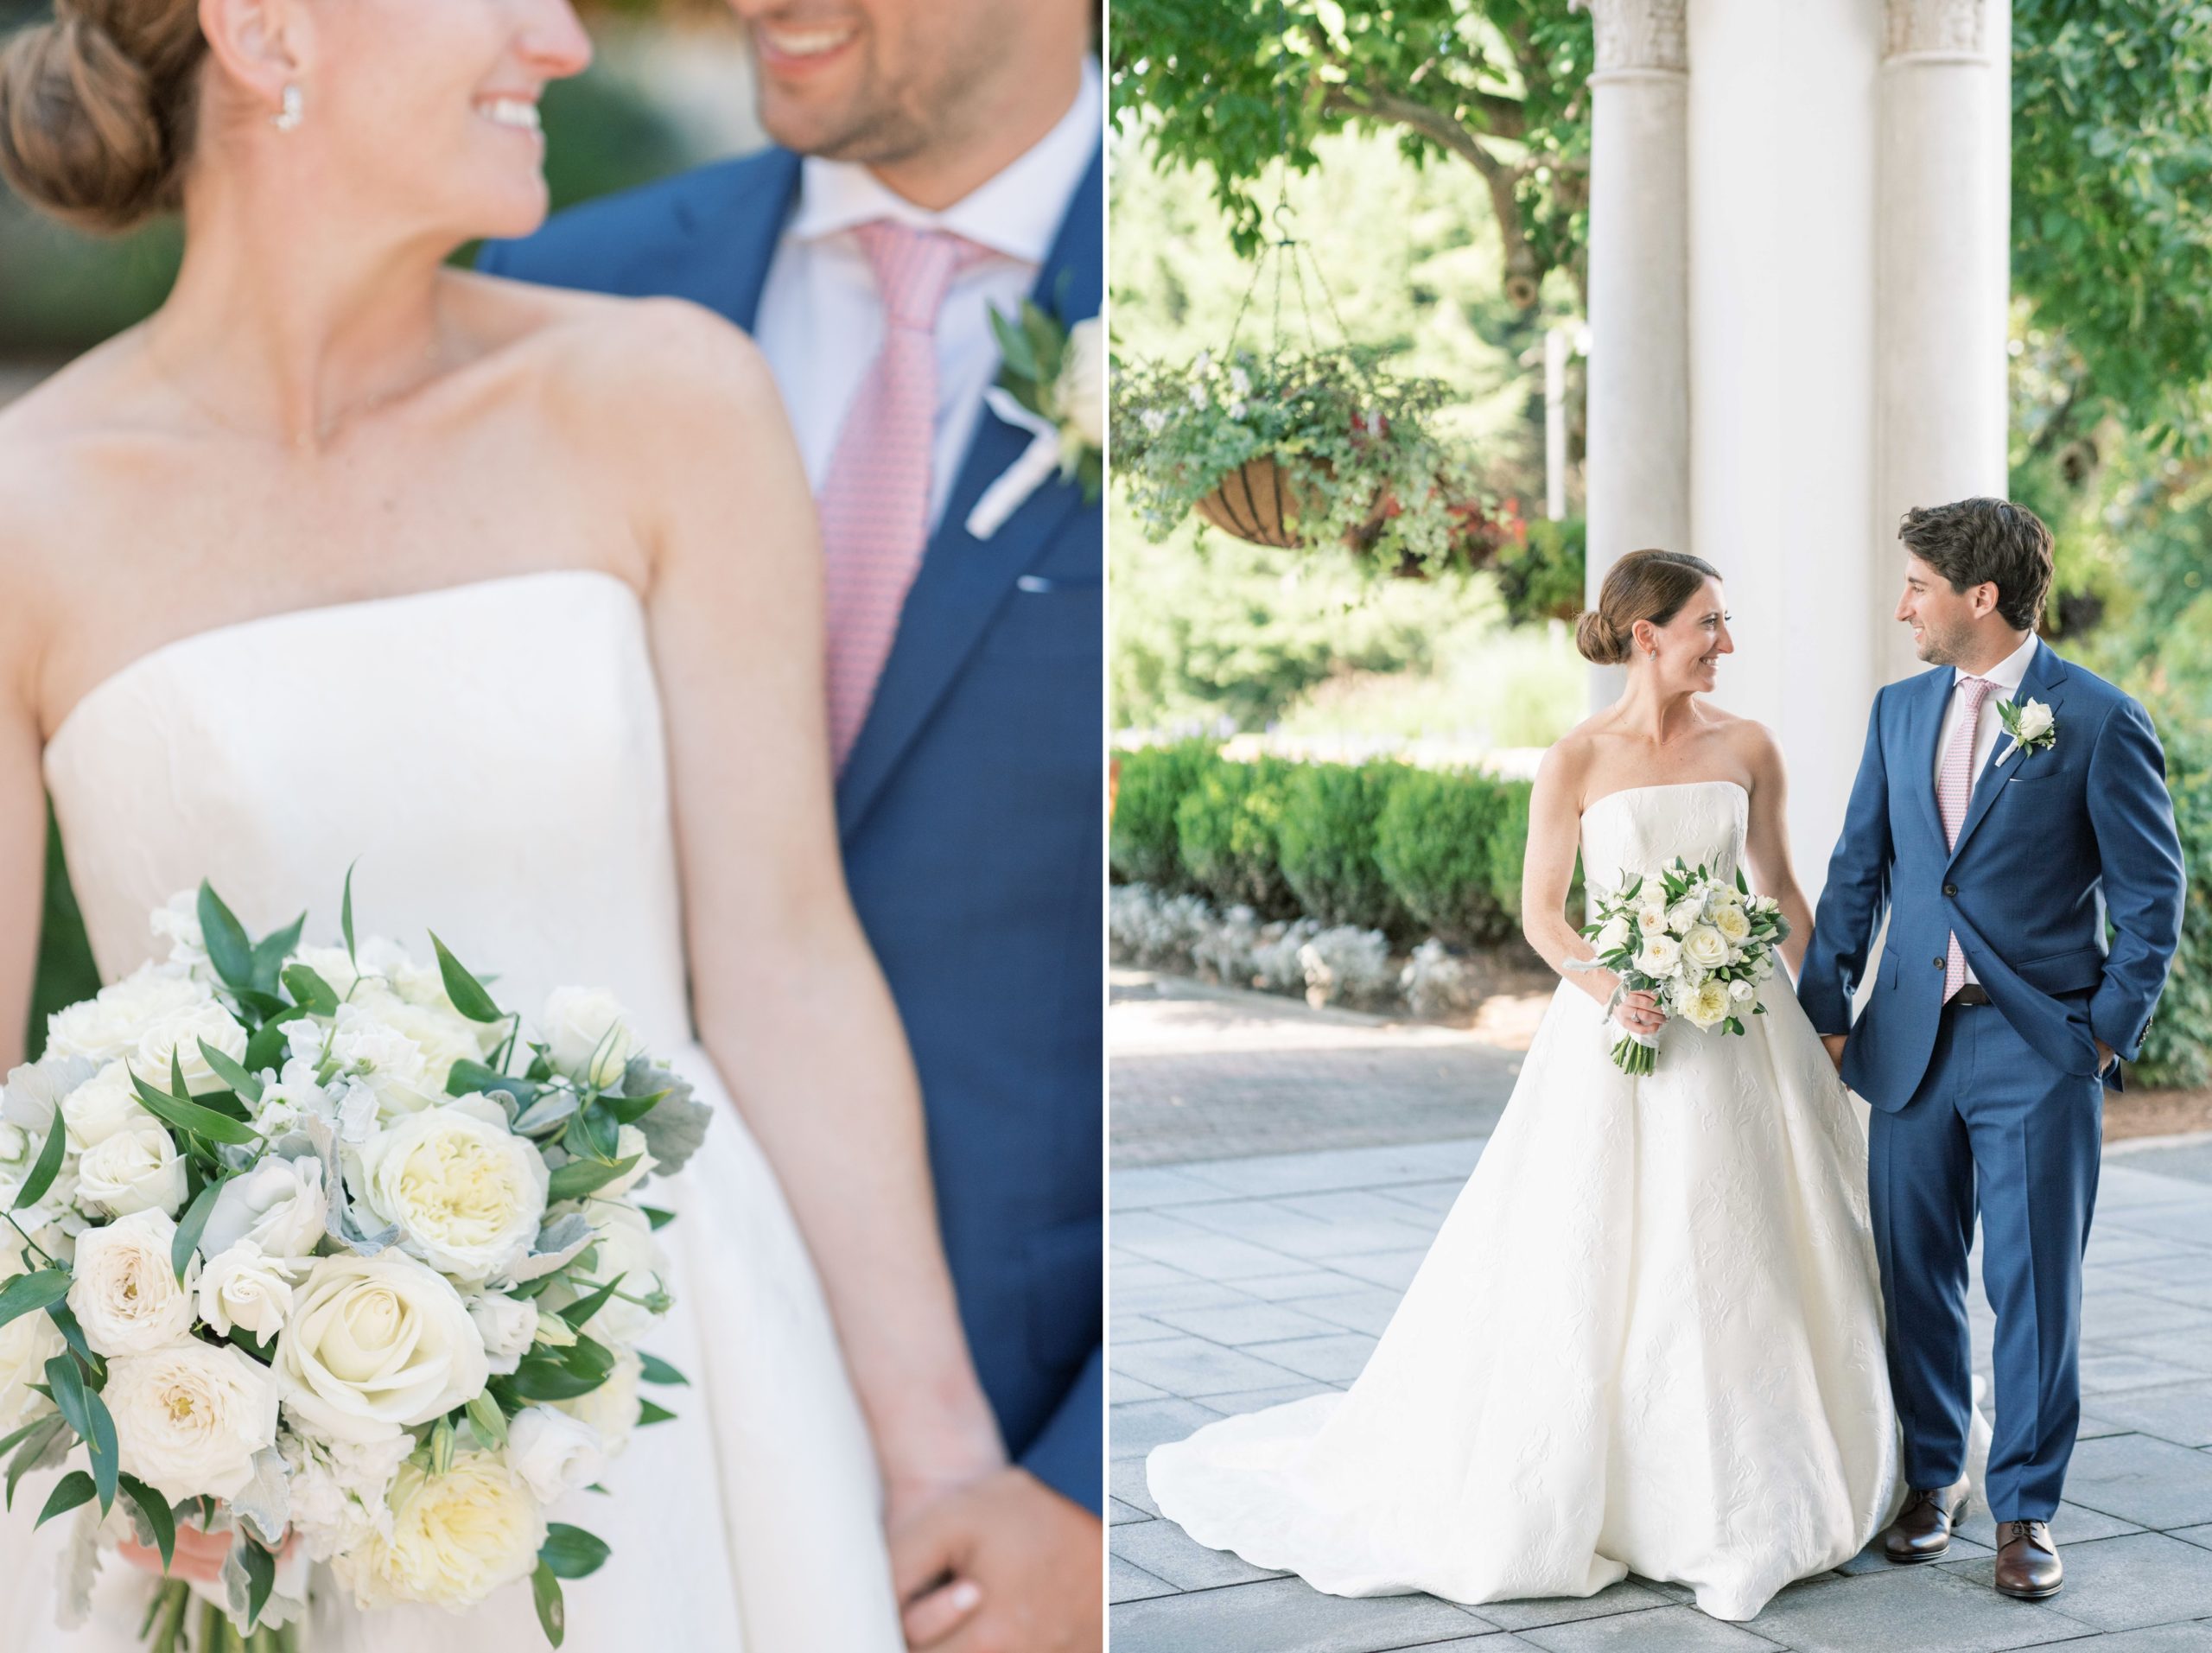 An outdoor summer wedding at the Congressional Country Club in Washington, DC with wedding photography by Alicia Lacey.